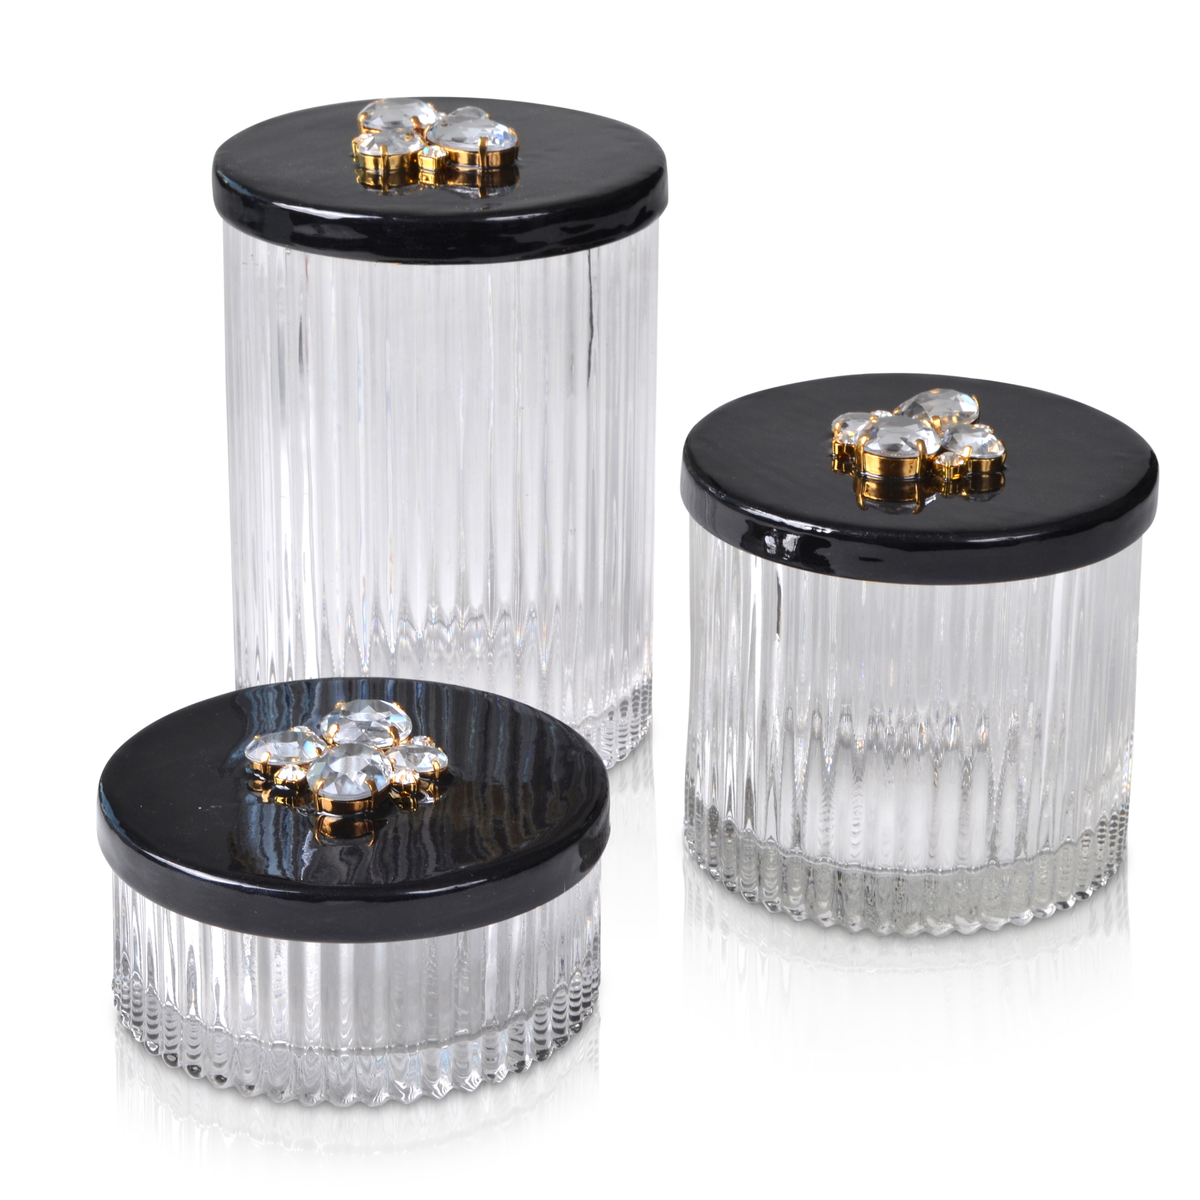 Mike and Ally Vanity Jars Black Enamel Set with Jewel Embellishment on Lid with White Background